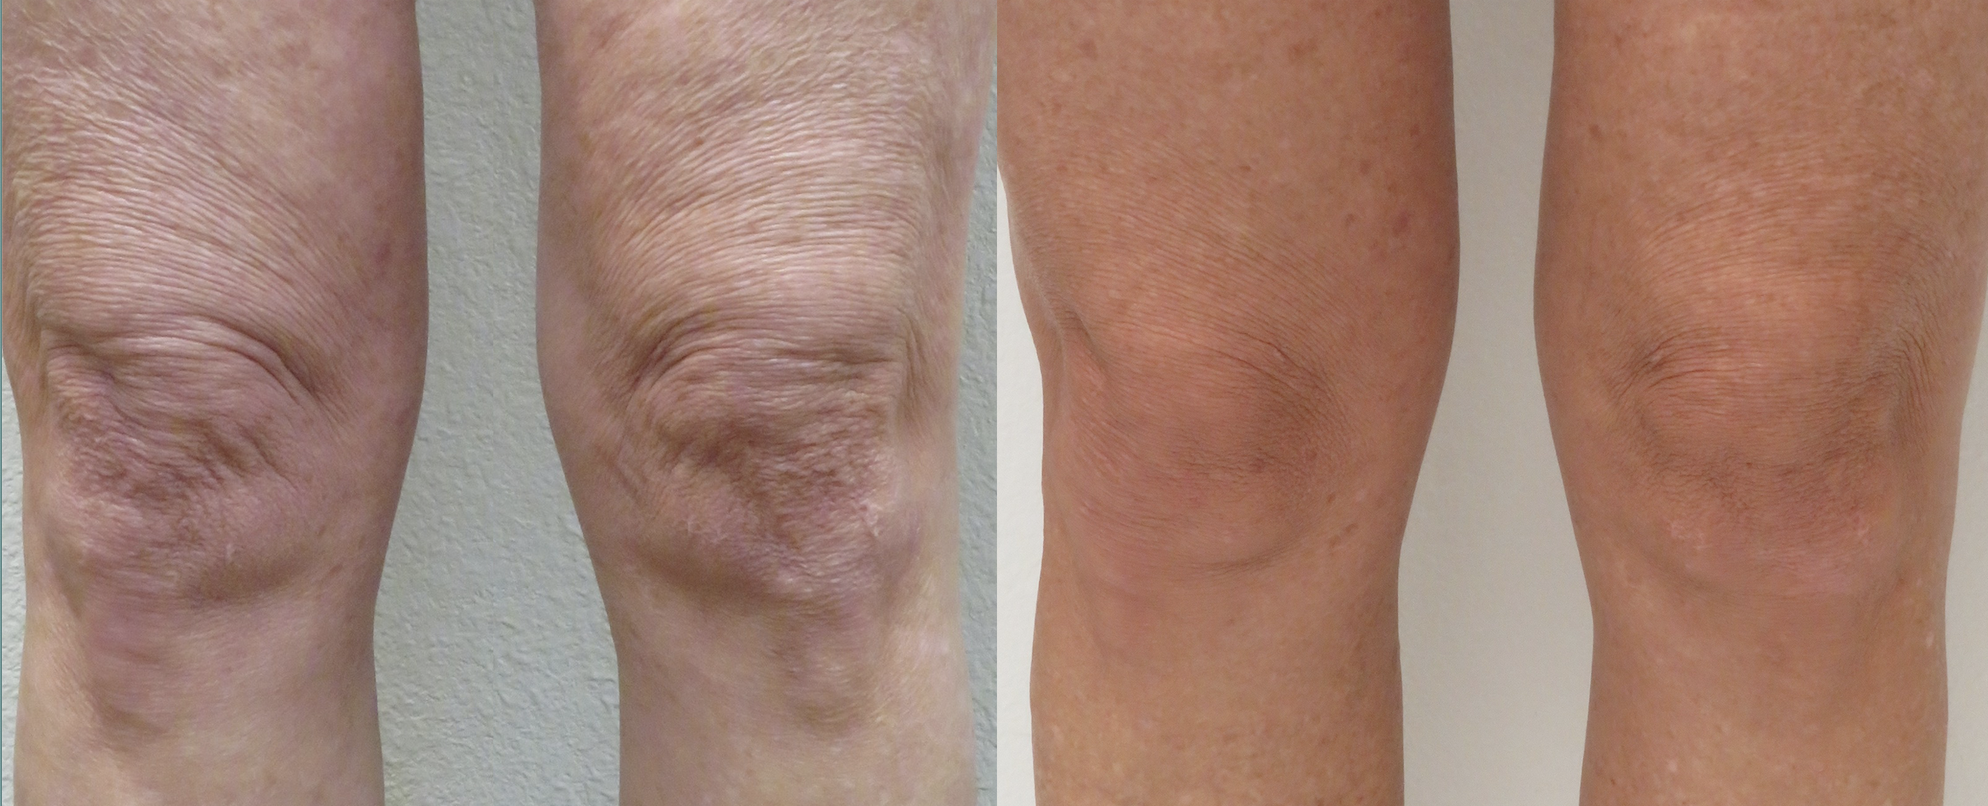 before & after image of a patients knees